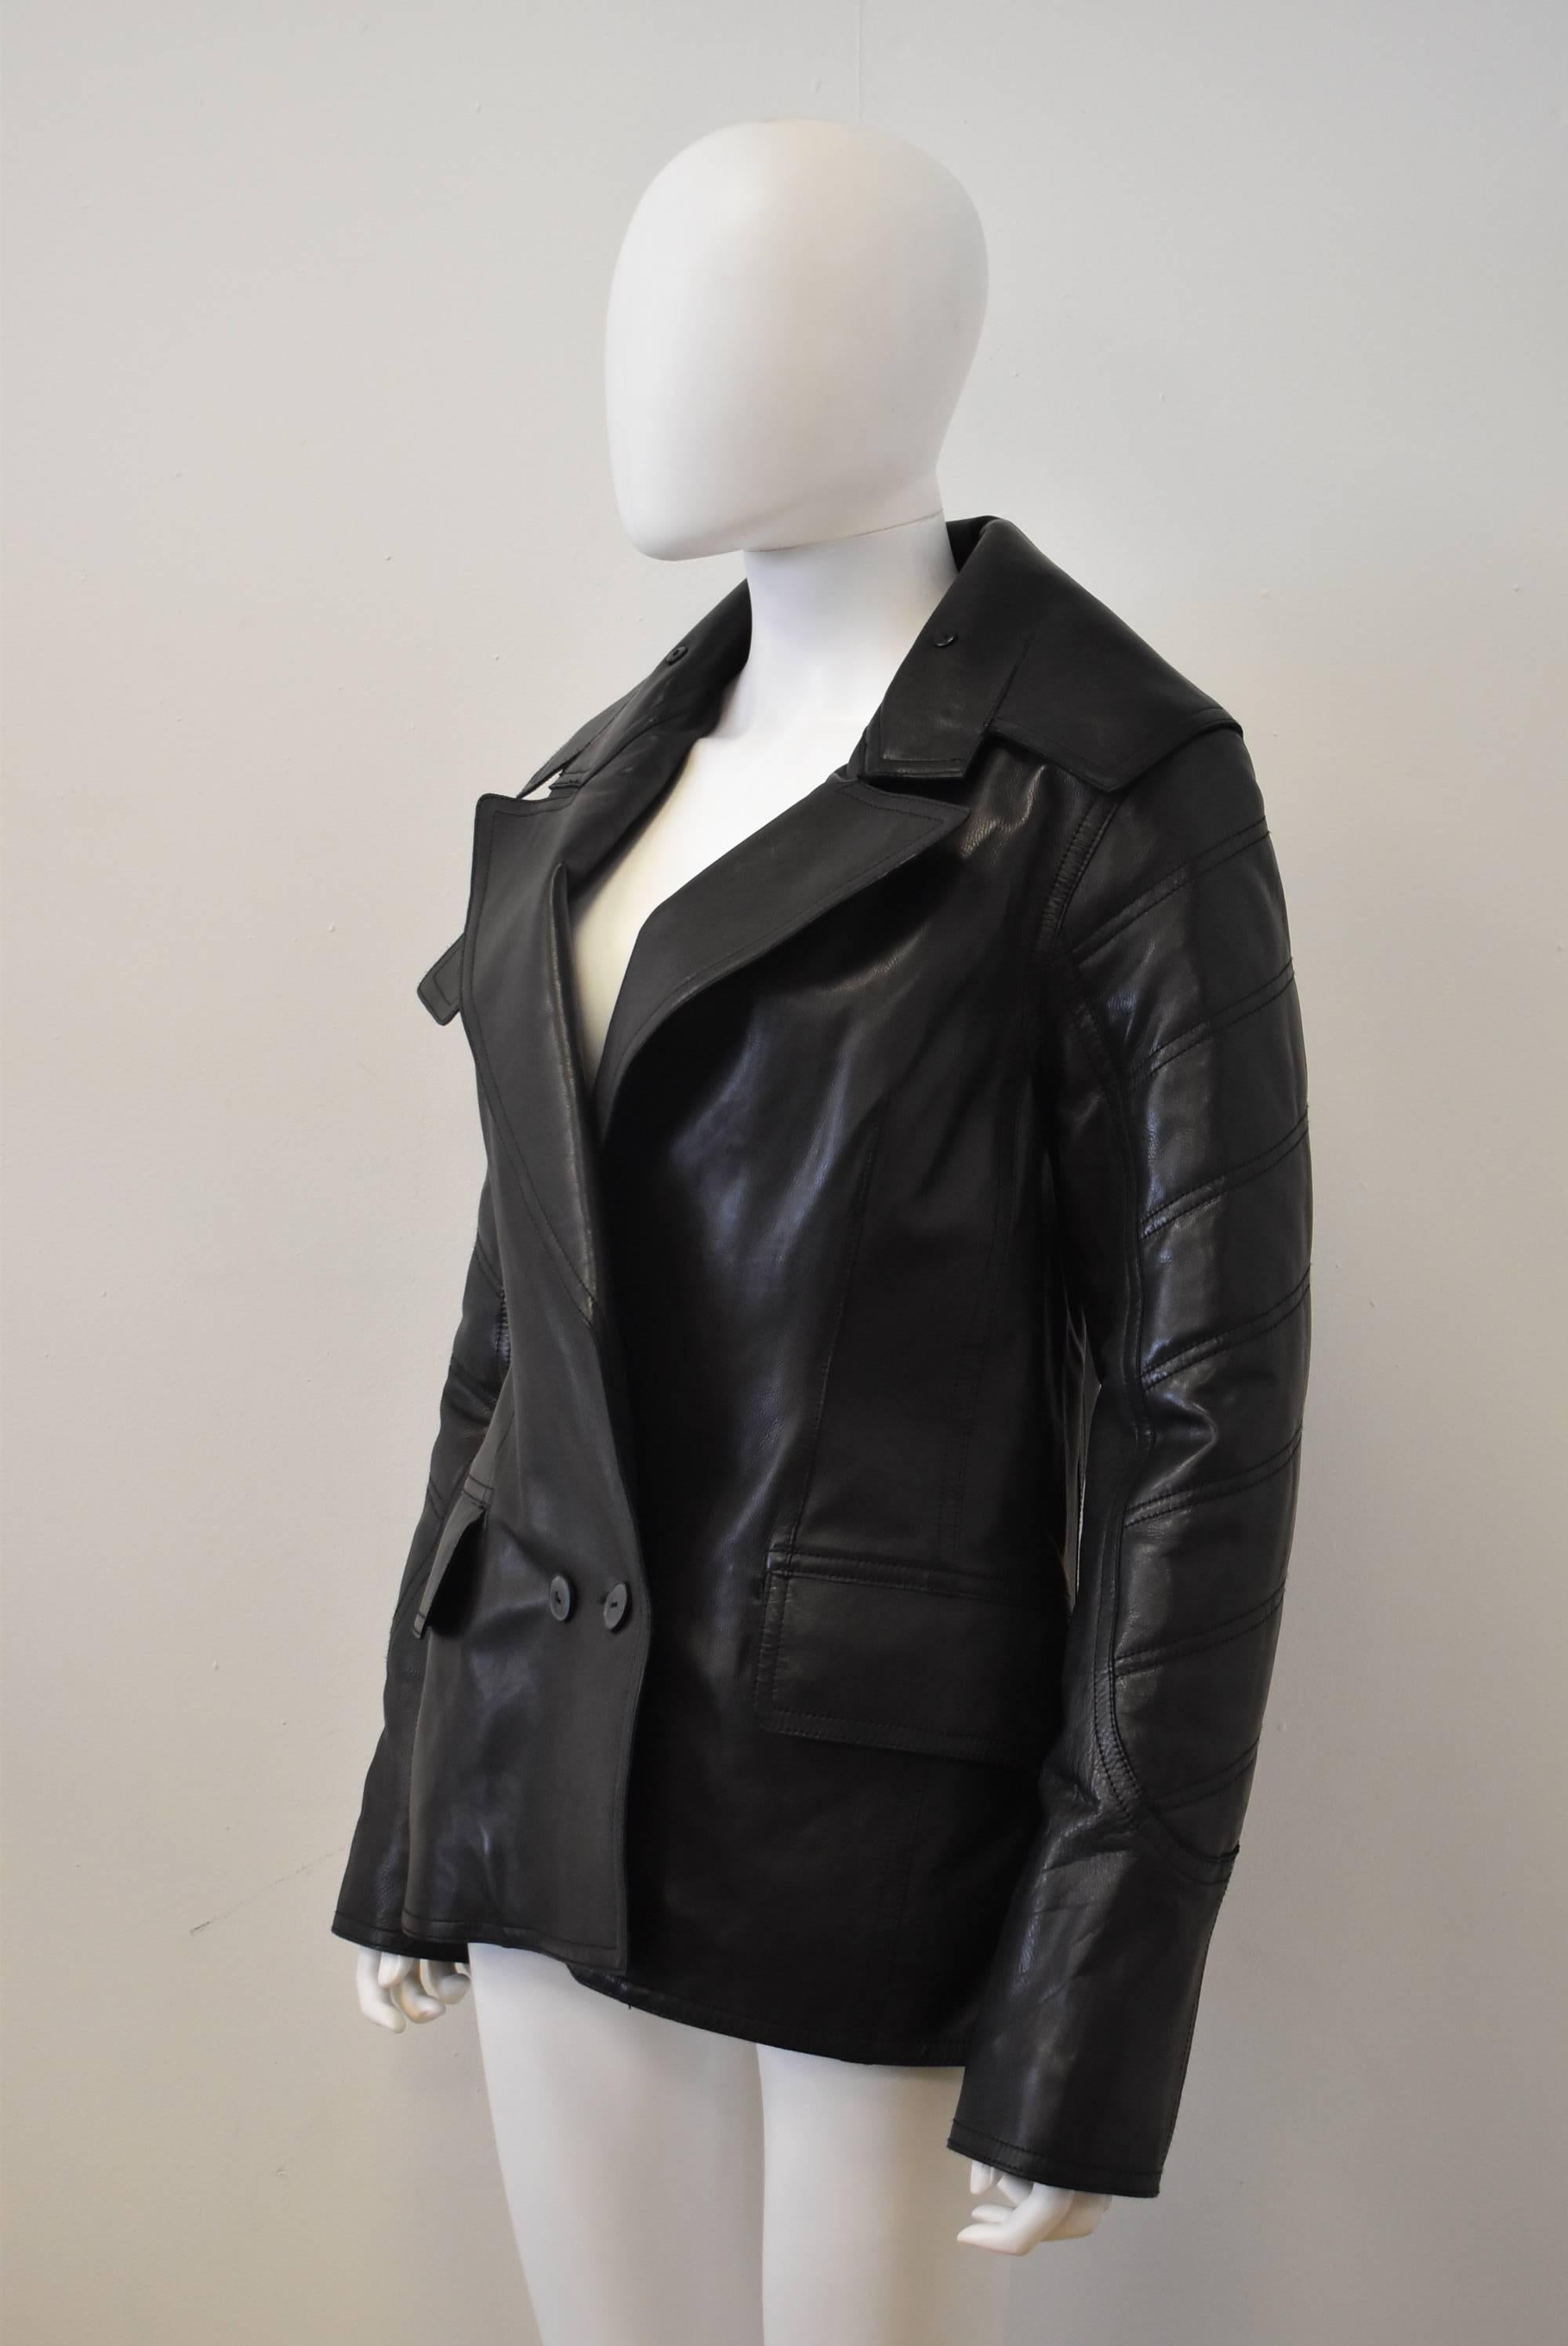 A brand new with tags Alexander Wang leather jacket. The jacket has an oversize biker style shape with quilted sleeves and and oversize collar. There are two pockets on the hip and button fastenings. A twist on a classic design. 